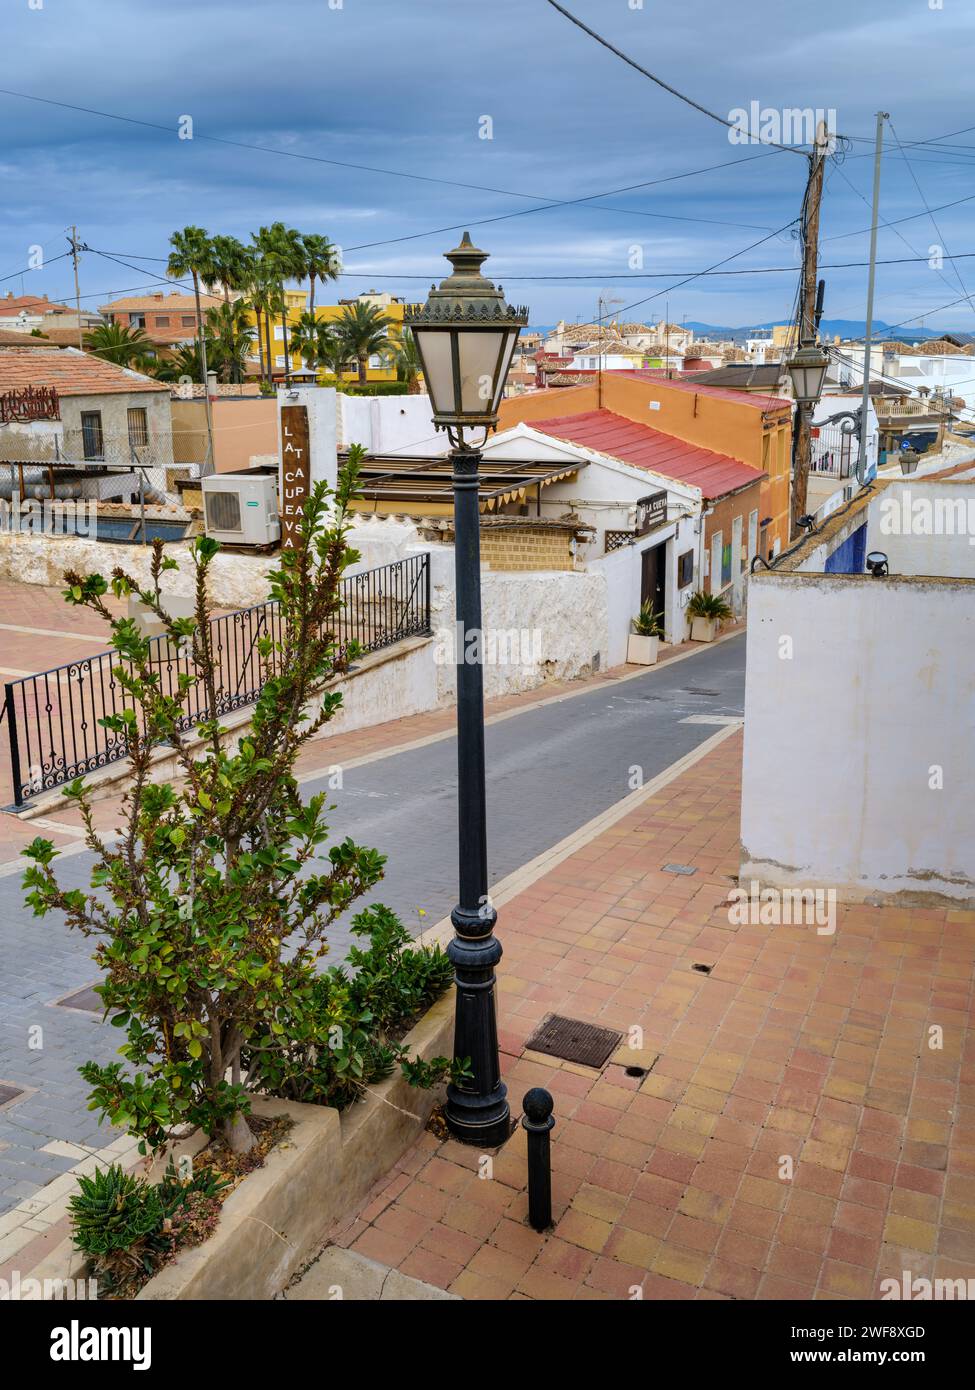 Calle la Cenia - San Miguel de Salinas, Alicante, Spain. One of the picturesque streets lined with a variety of small houses and apartments in San mig Stock Photo